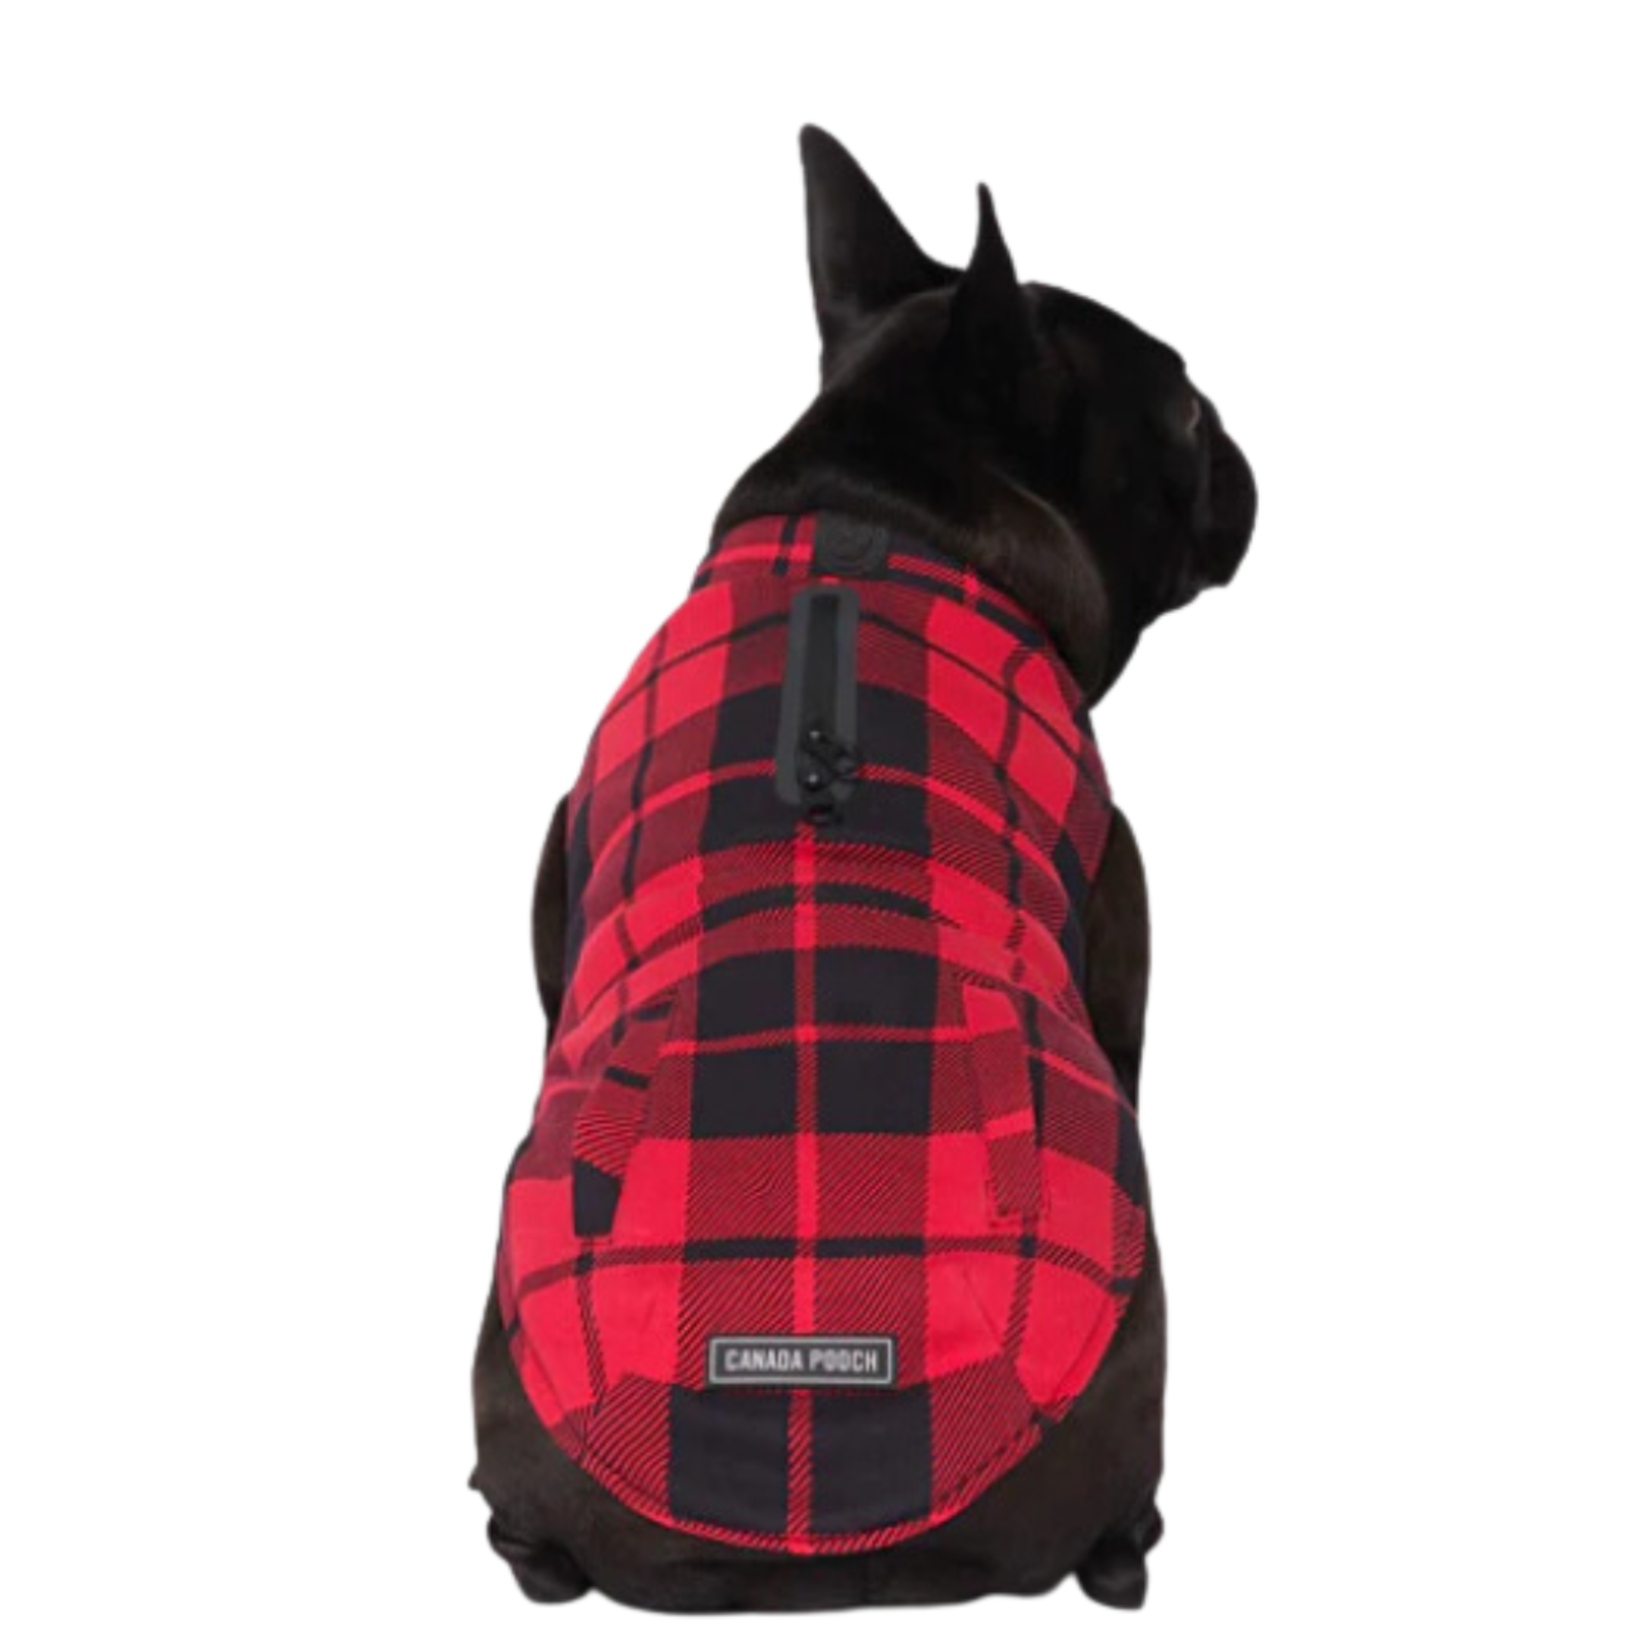 Canada Pooch Canada Pooch Thermal Tech Sweater Red Plaid